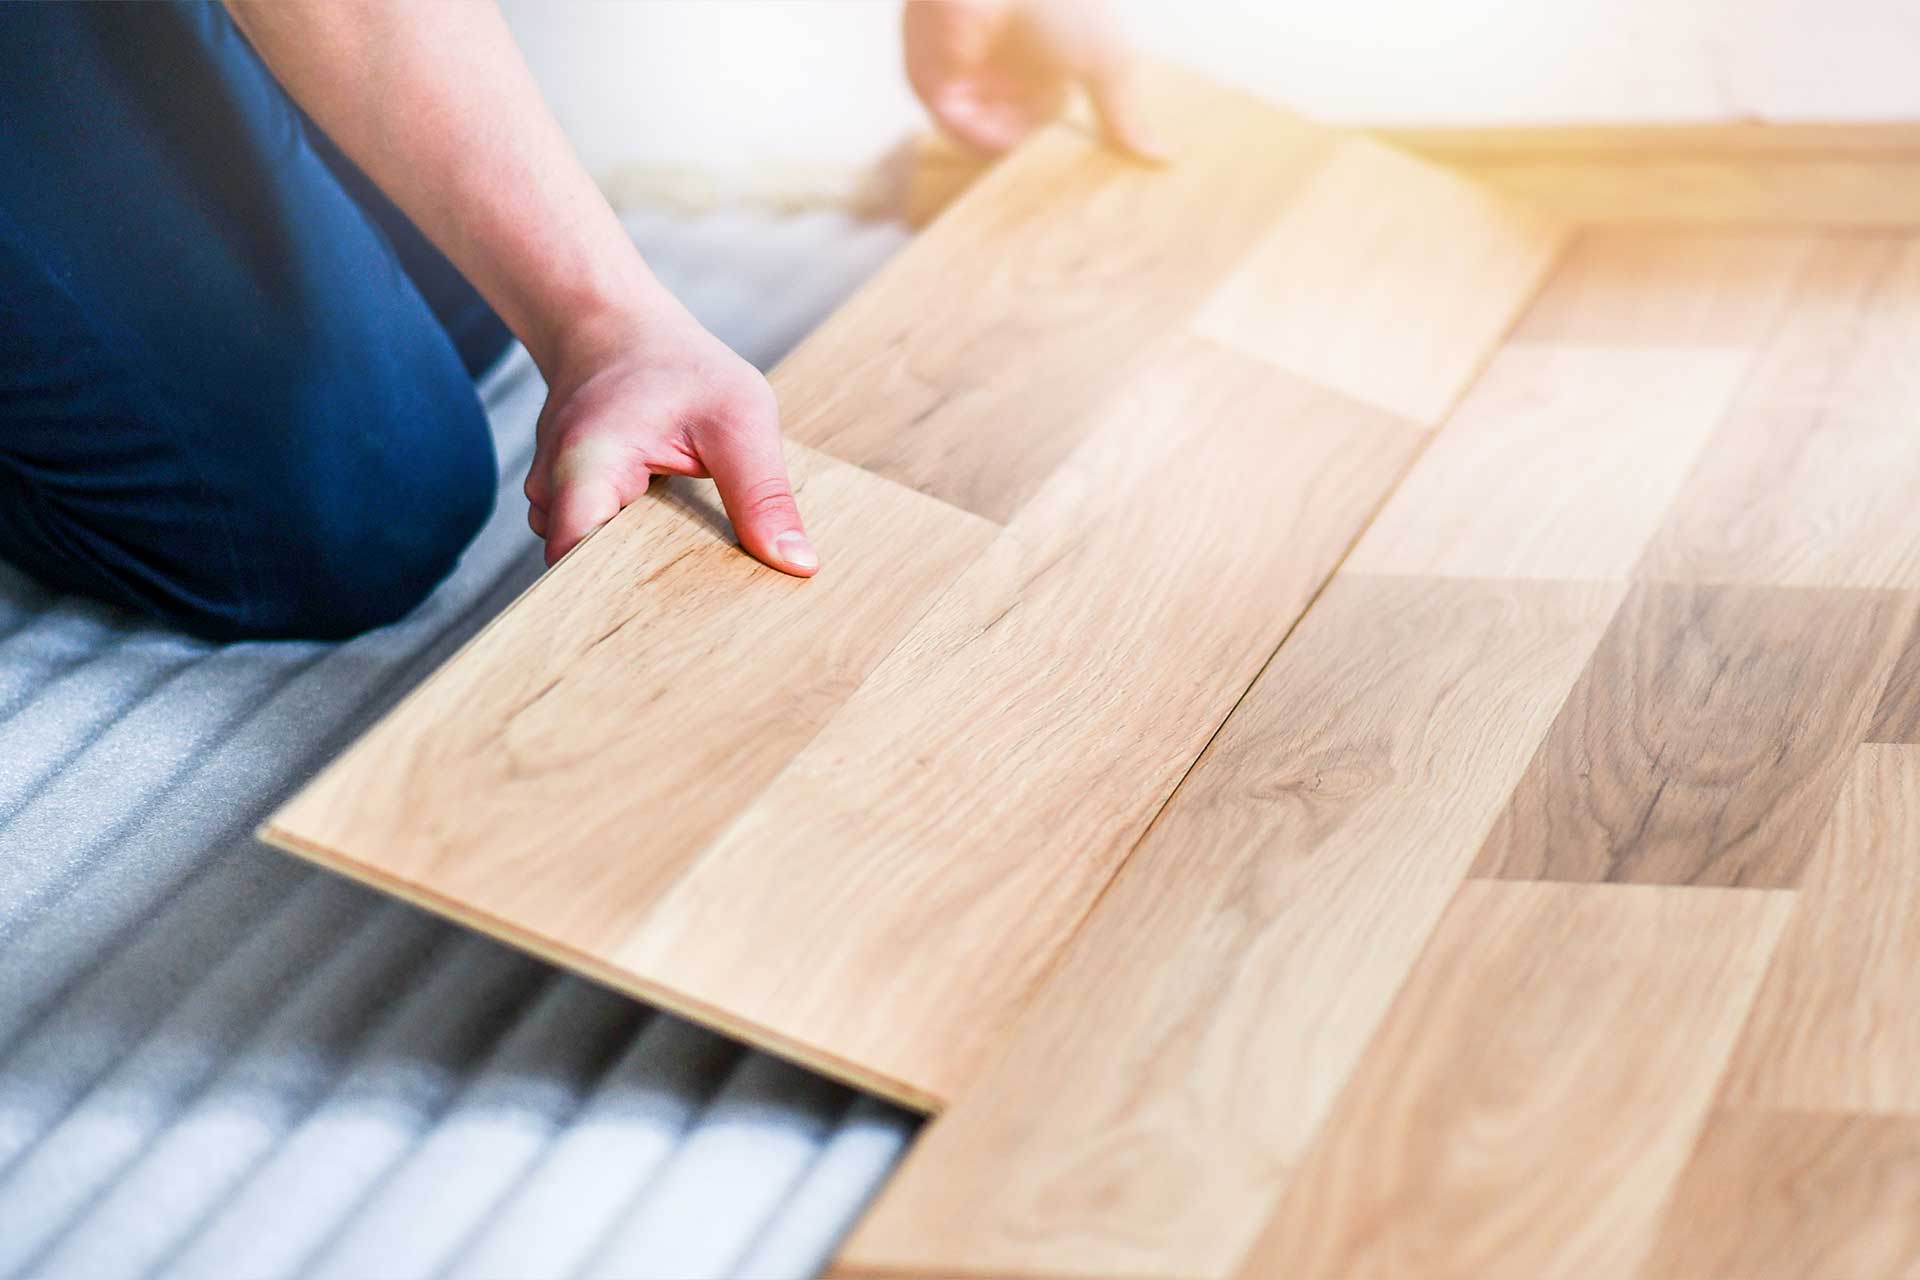 Laminate Flooring Fitting Cost In 2022, Can I Install Laminate Flooring Myself